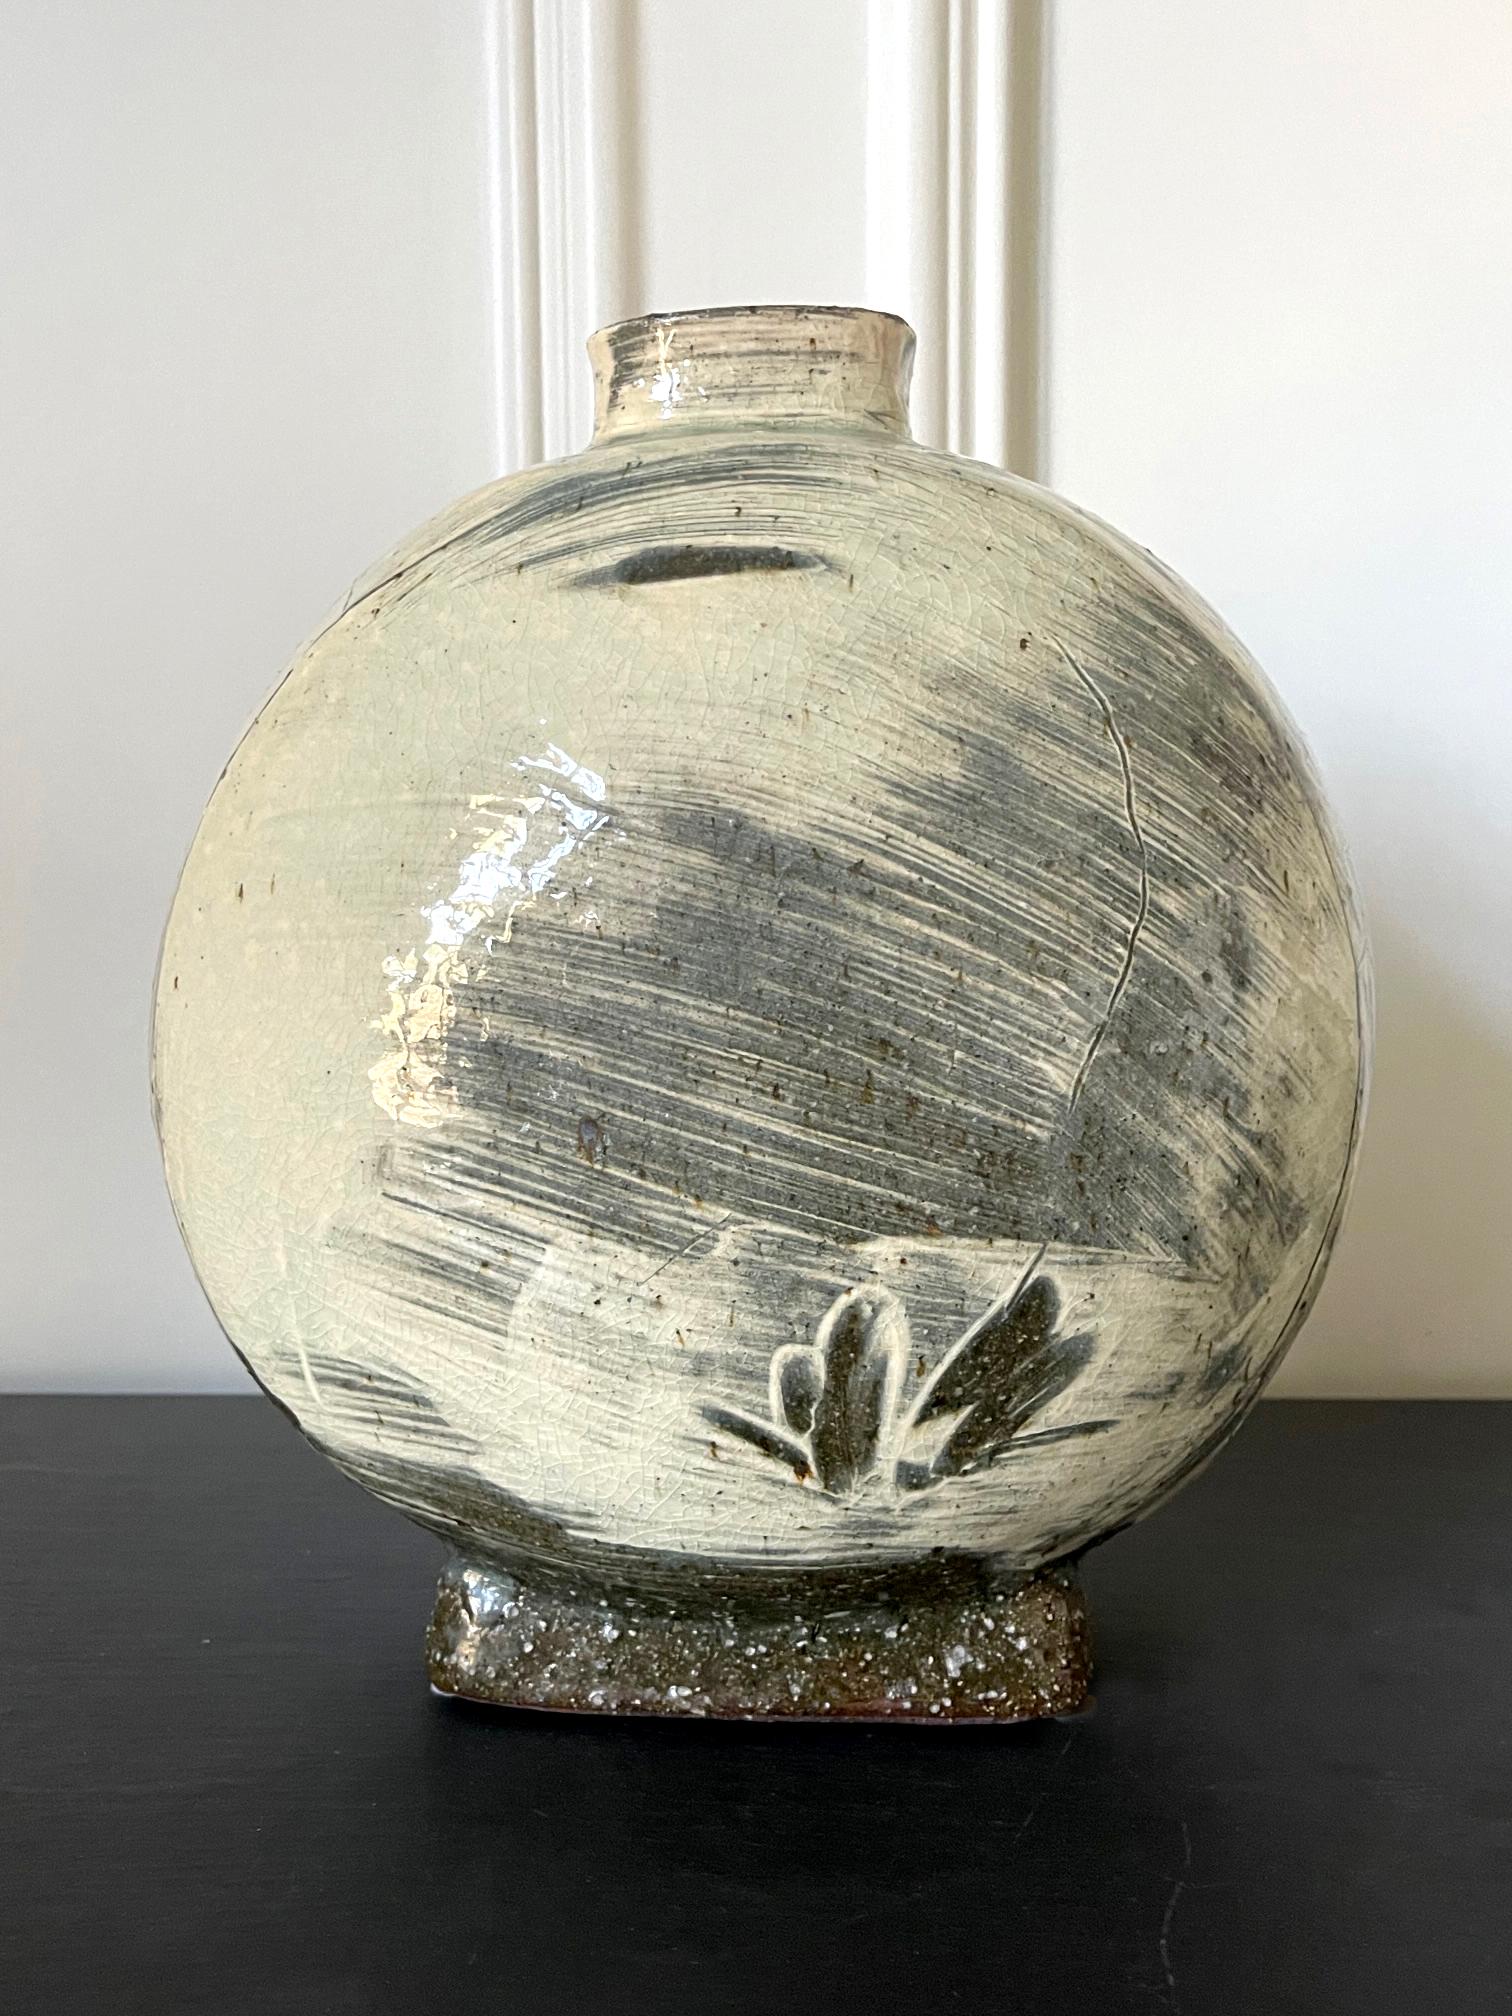 Modern Contemporary Ceramic Buncheong Moon Flask by Kang Hyo Lee